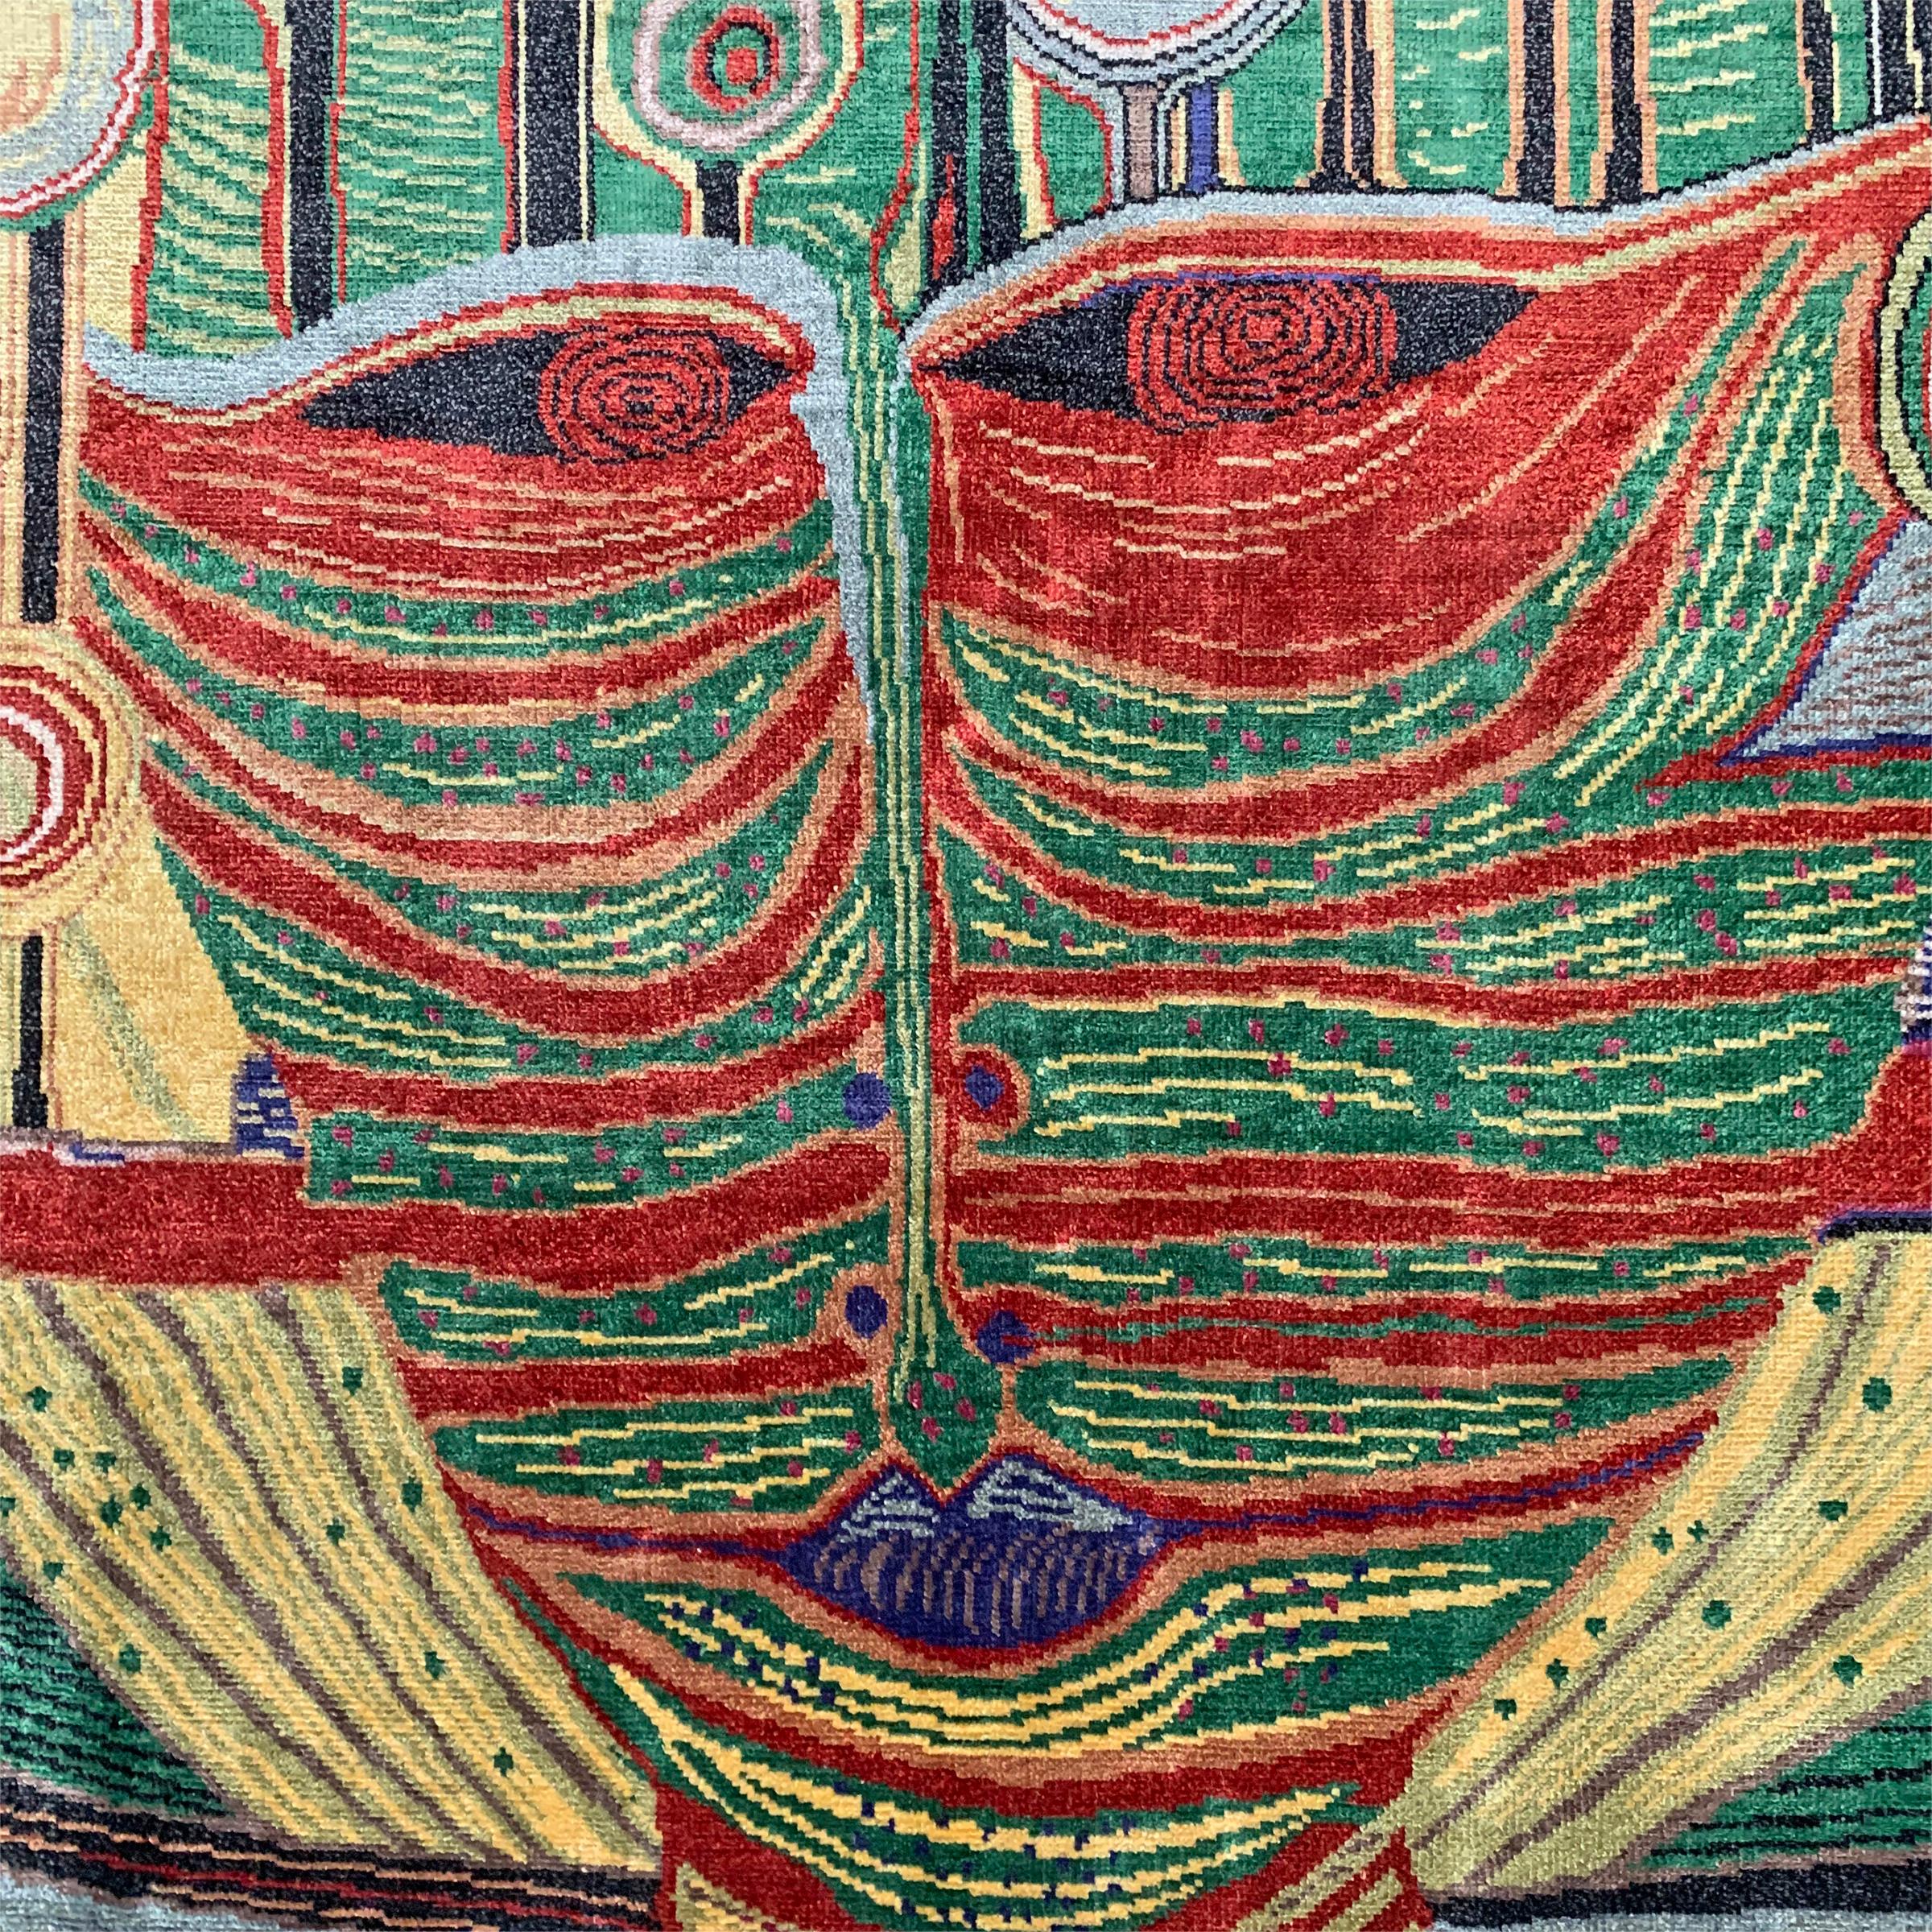 An unbelievable handwoven Brazilian silk tapestry inspired by a painting by Austrian artist Friedensreich Hundertwasser (1928-2000) depicting a portrait amidst a fanciful landscape of lollipop trees, all woven in radiant crimsons, golds, greens,